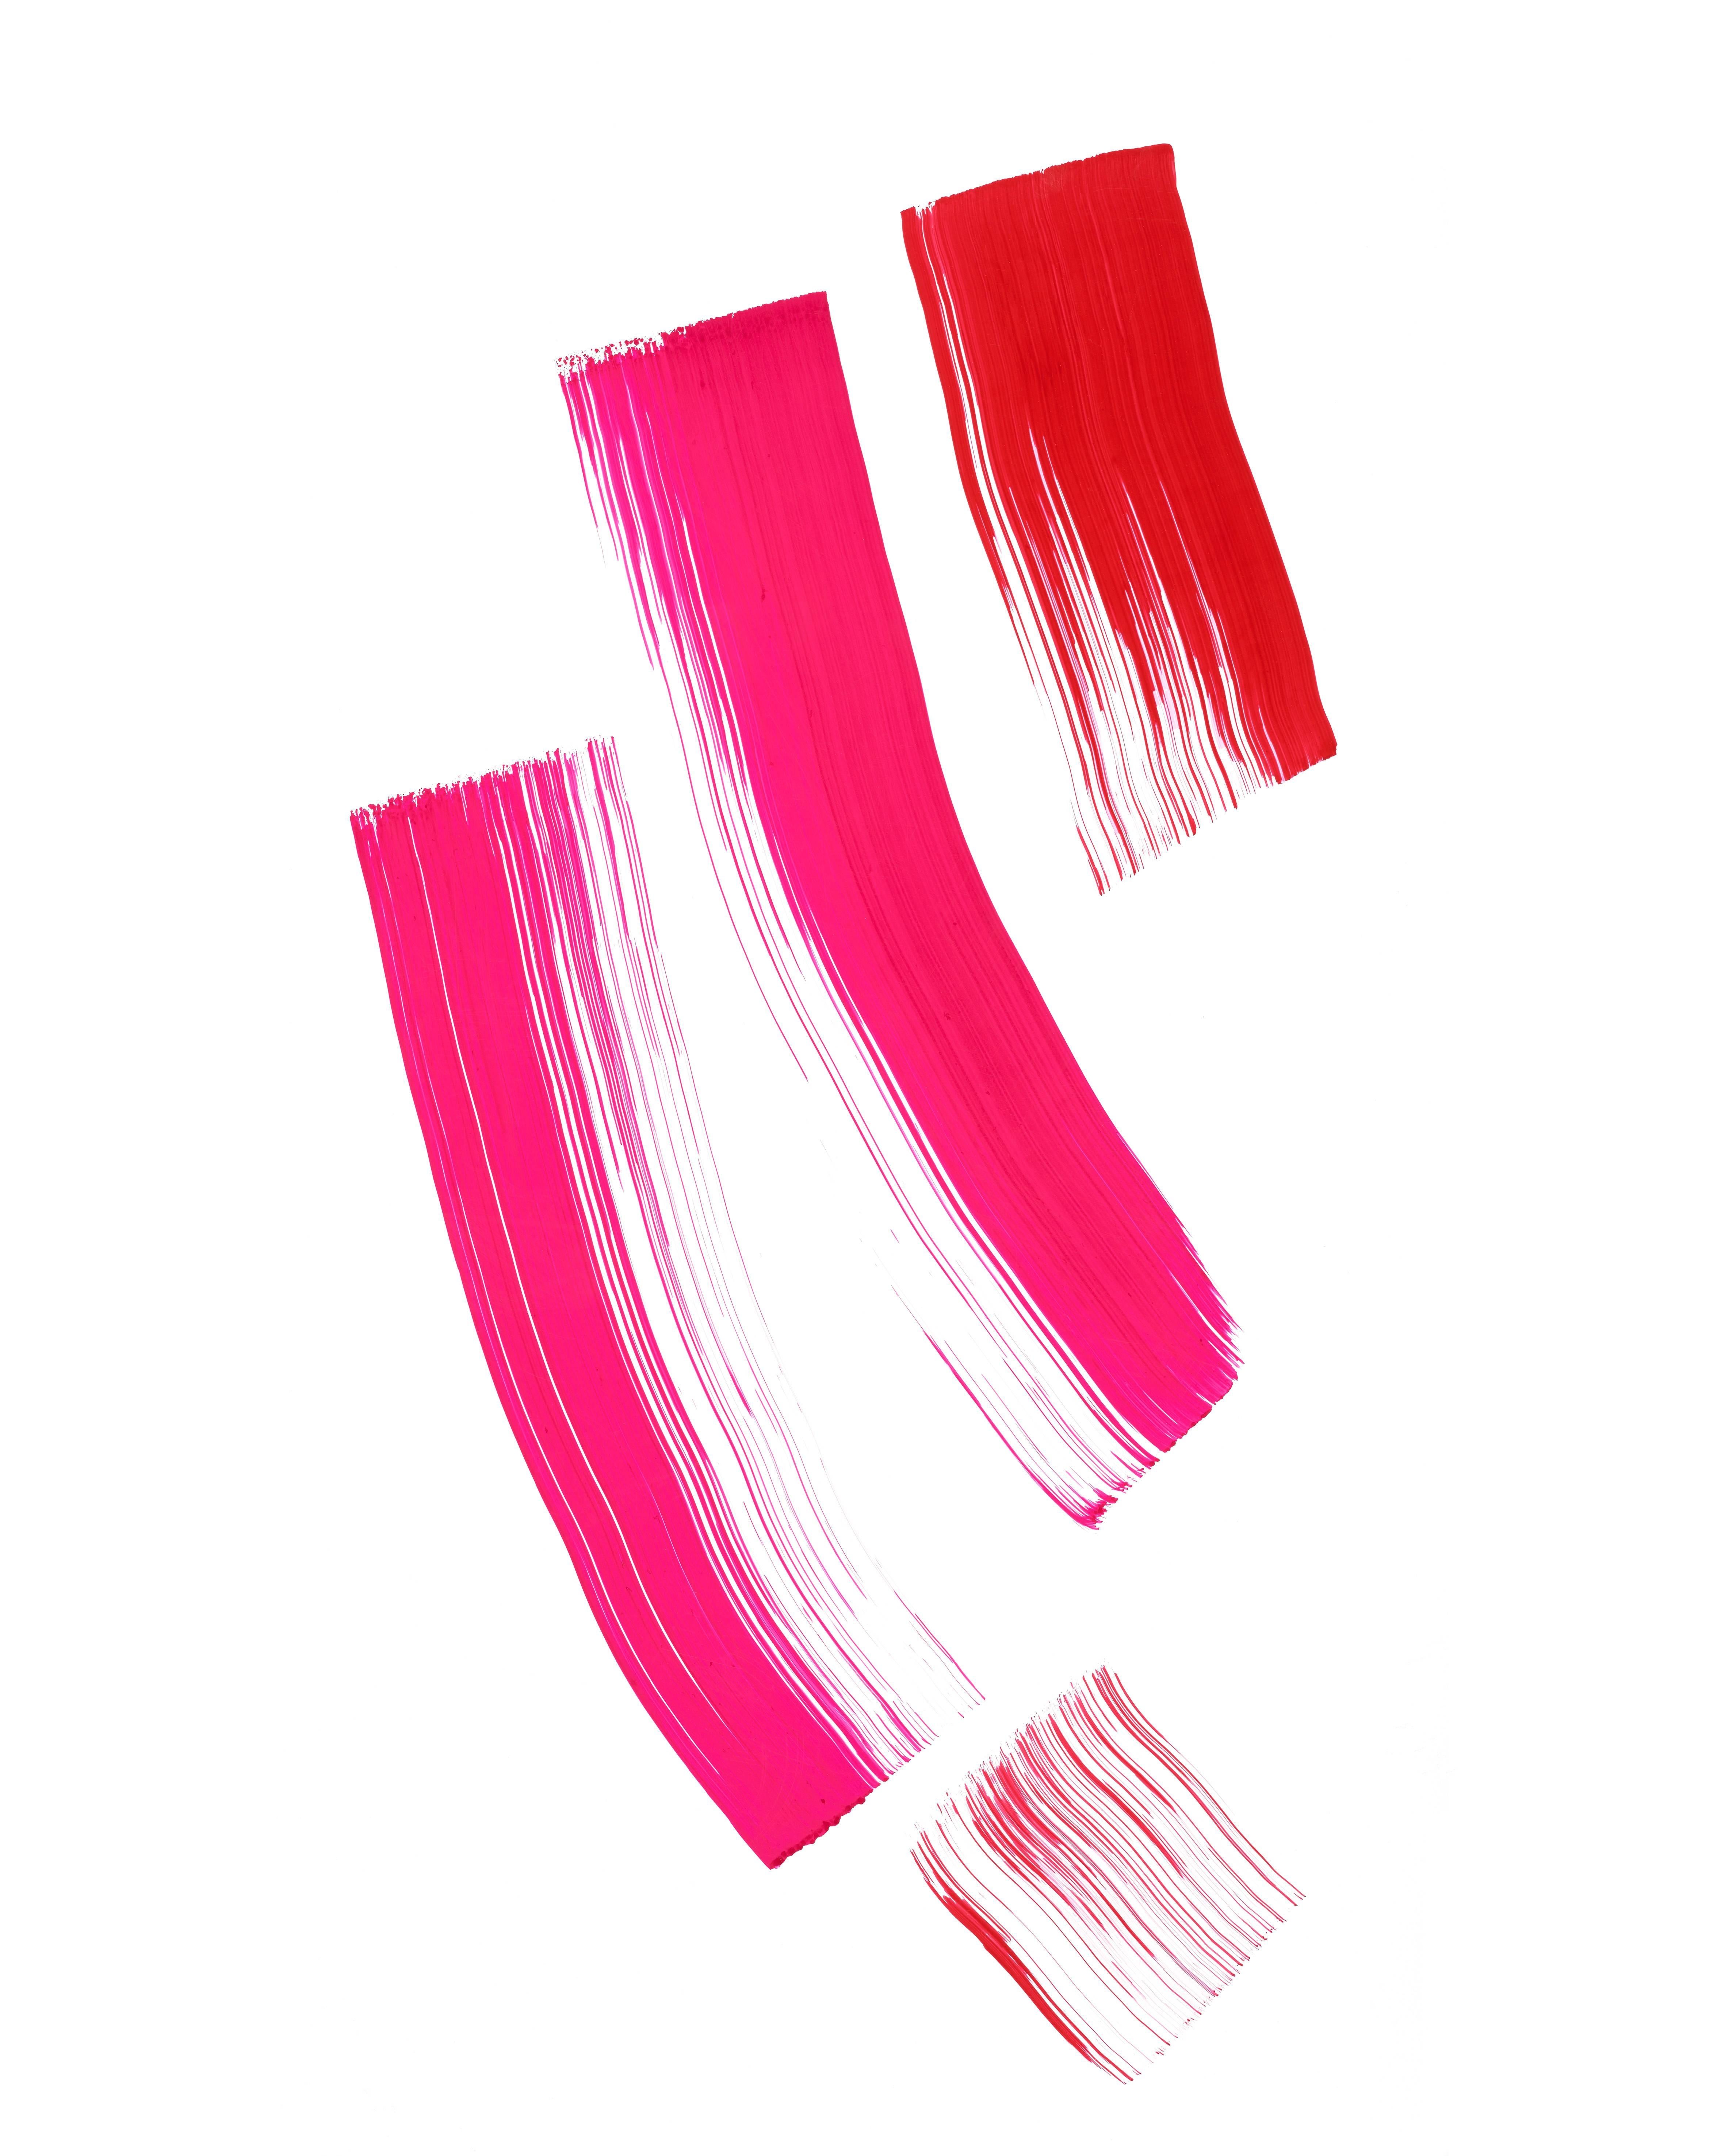 Edition of Red and Magenta Work - Contemporary Print by Phil Chang